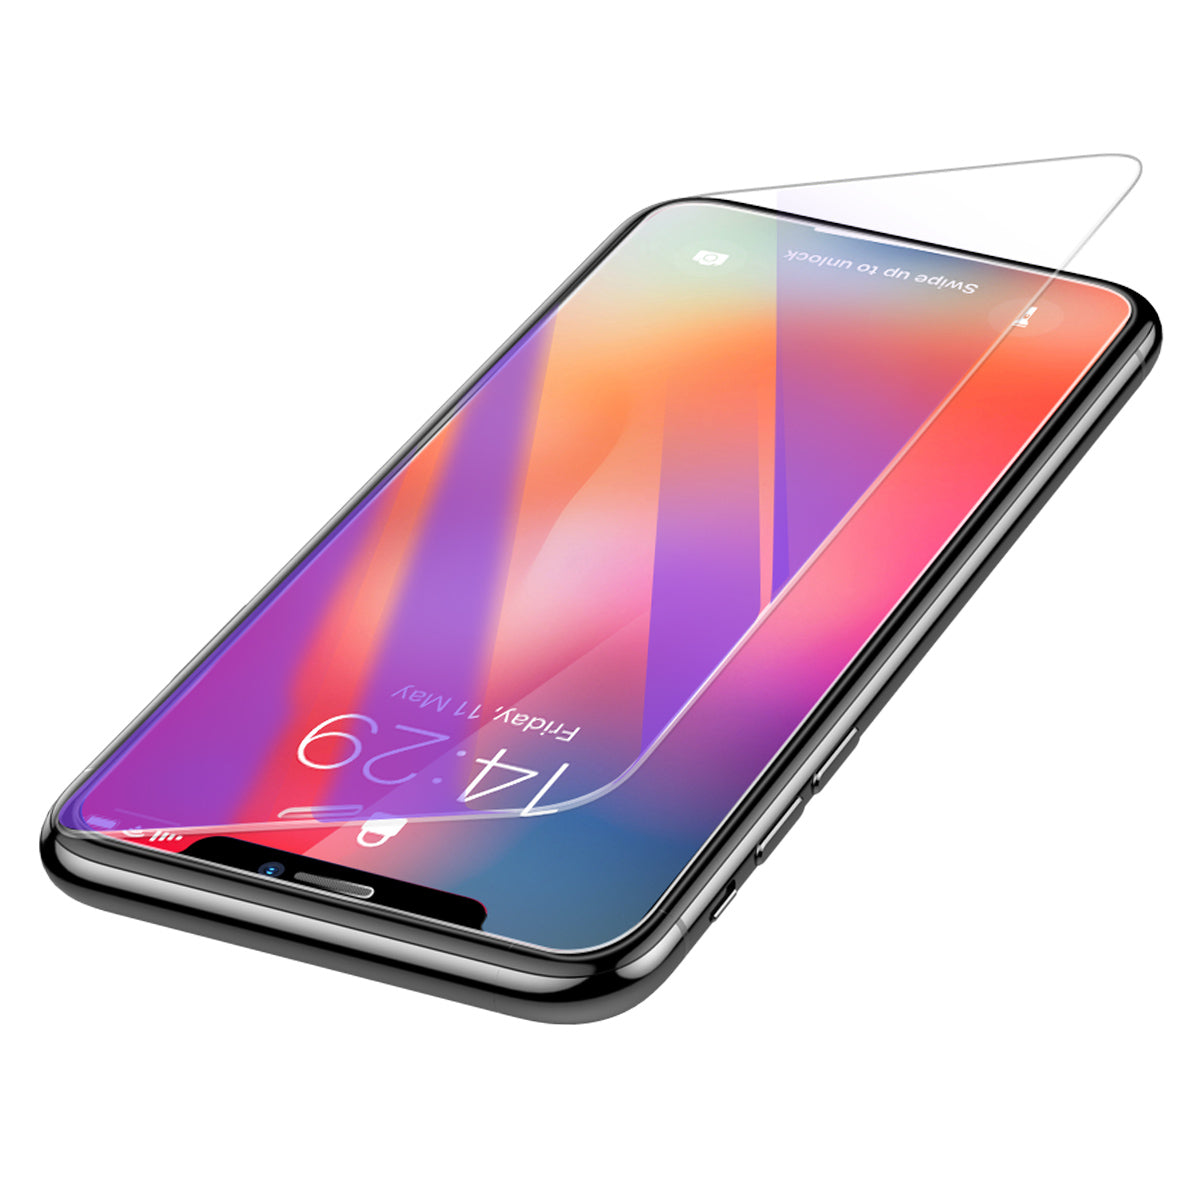 Baseus 0.3mm Clear/Anti Blue Light Ray Full Tempered Glass Screen Protector For iPhone XS Max 6.5" 2018